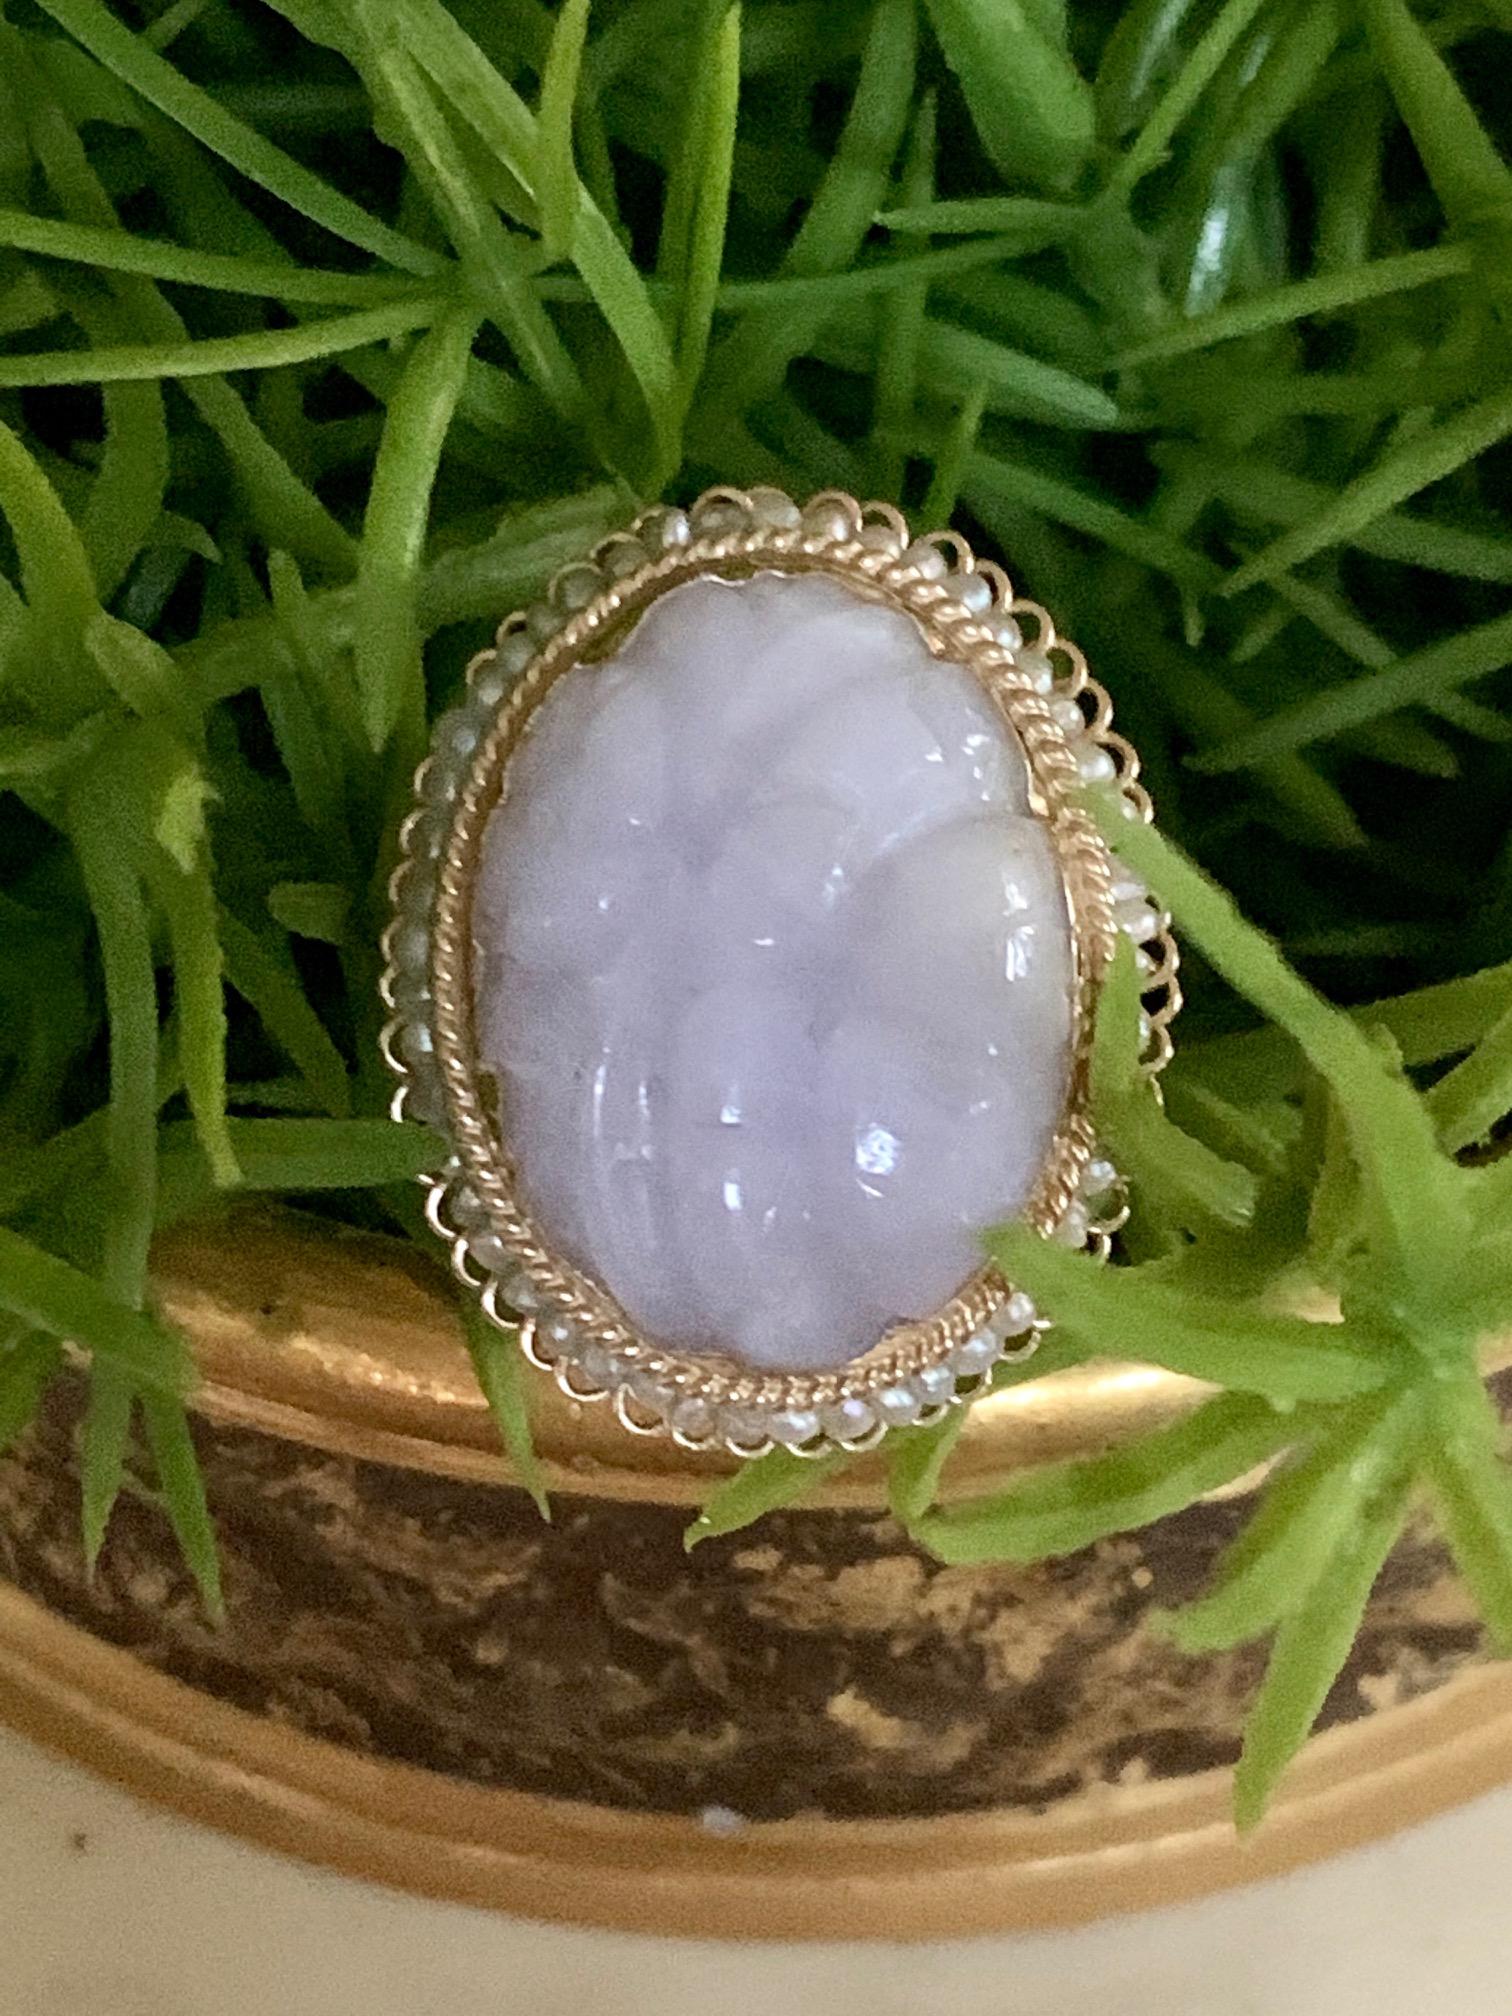 This beautifully carved Lavender Jade stone is encircled by a halo of Seed Pearls to really set off the beautiful Lavender color of the stone. The stone just 